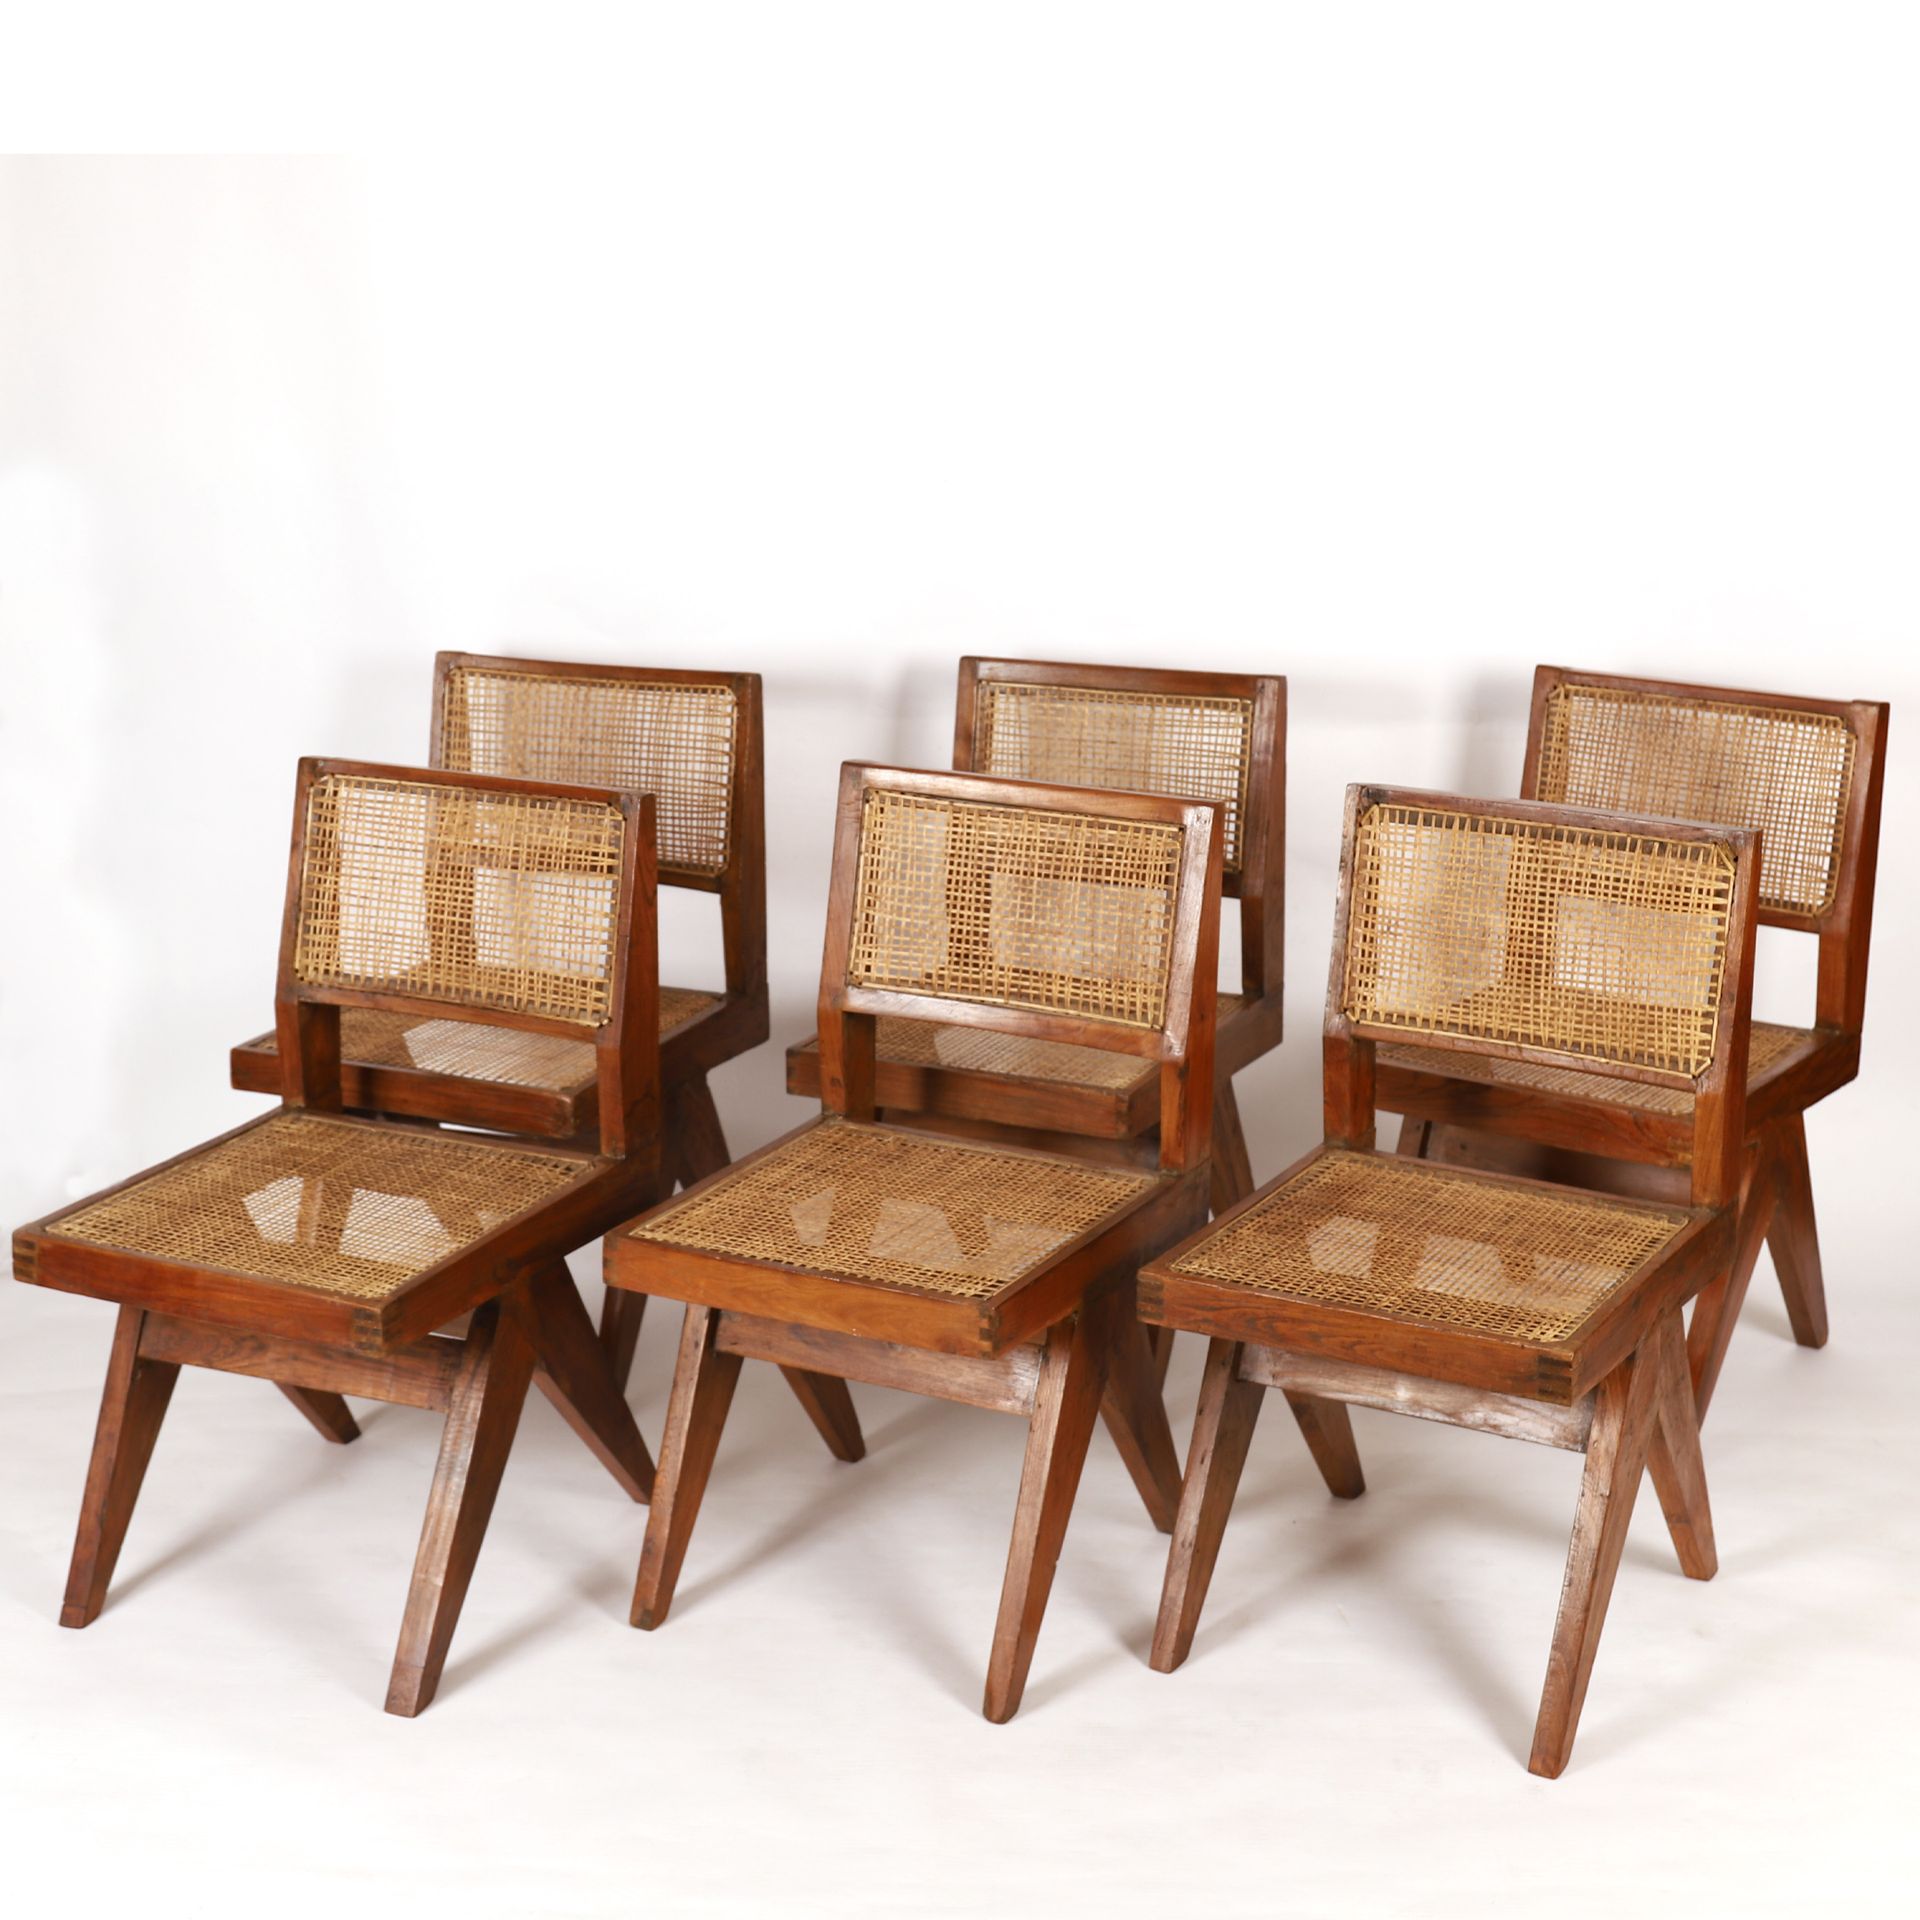 Null PIERRE JEANNERET (1896-1967)

Exceptional Suite of 6 chairs "DINING CHAIRS &hellip;